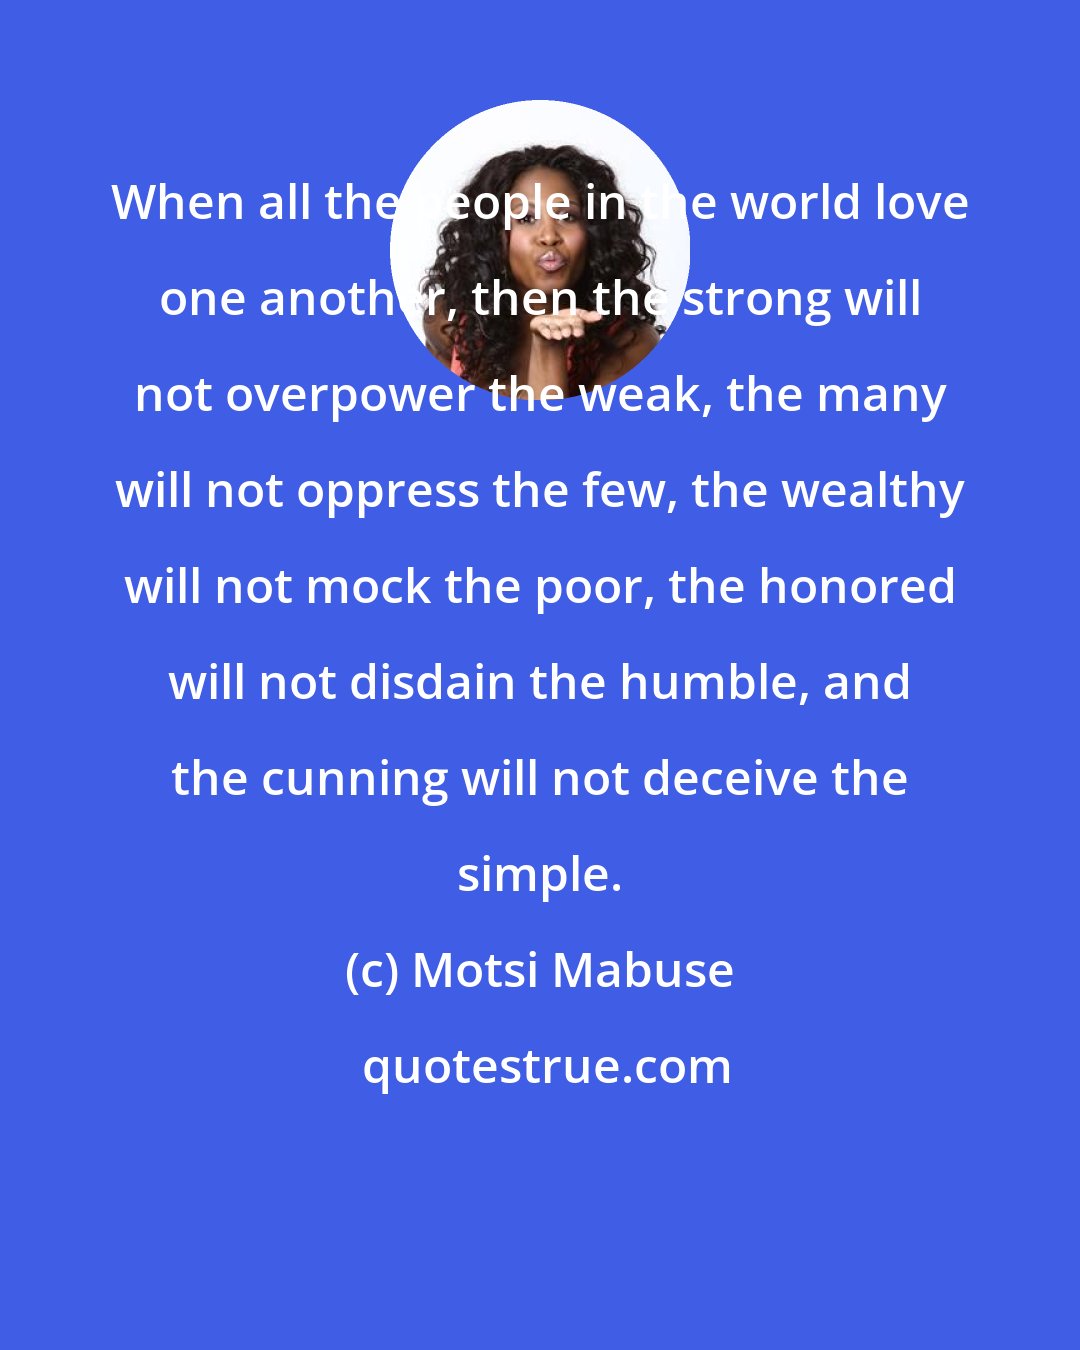 Motsi Mabuse: When all the people in the world love one another, then the strong will not overpower the weak, the many will not oppress the few, the wealthy will not mock the poor, the honored will not disdain the humble, and the cunning will not deceive the simple.